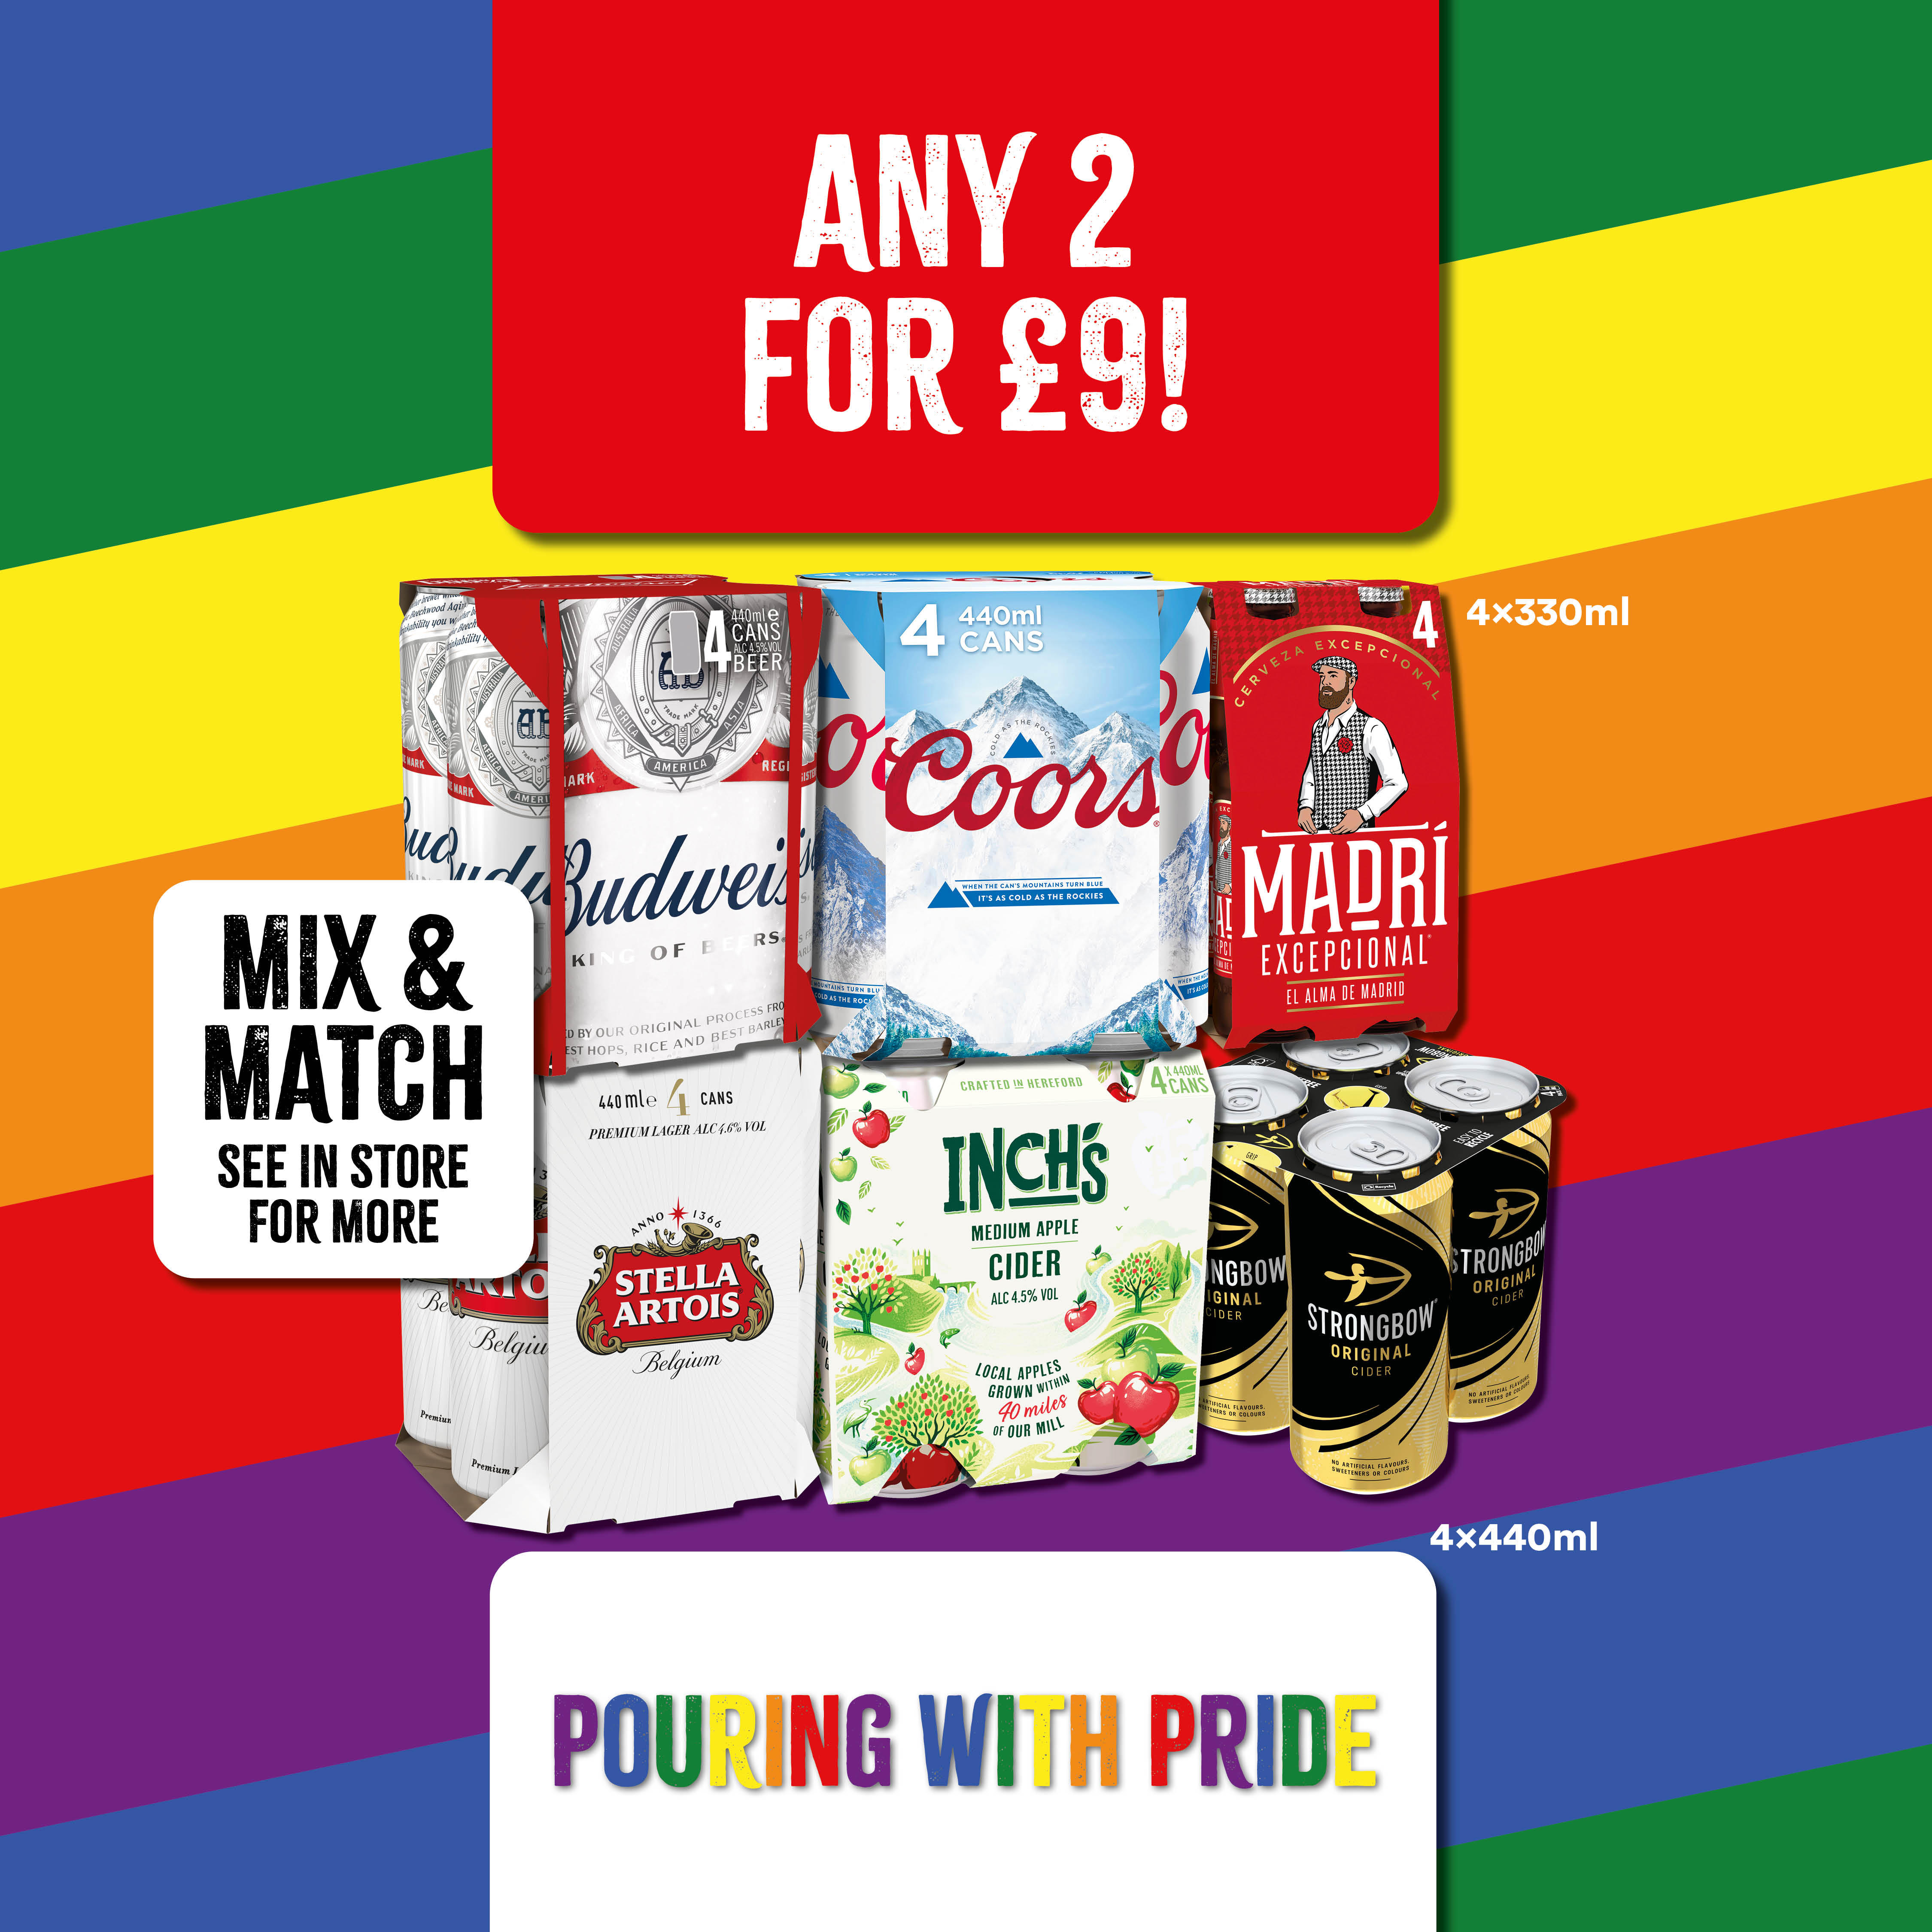 Any 2 for £9 Budweiser, Coors and Madri - 4 x 330ml 
Stella Artois, Inchs and Strongbow Original 4 x Bargain Booze Plus Horley 01293 820180